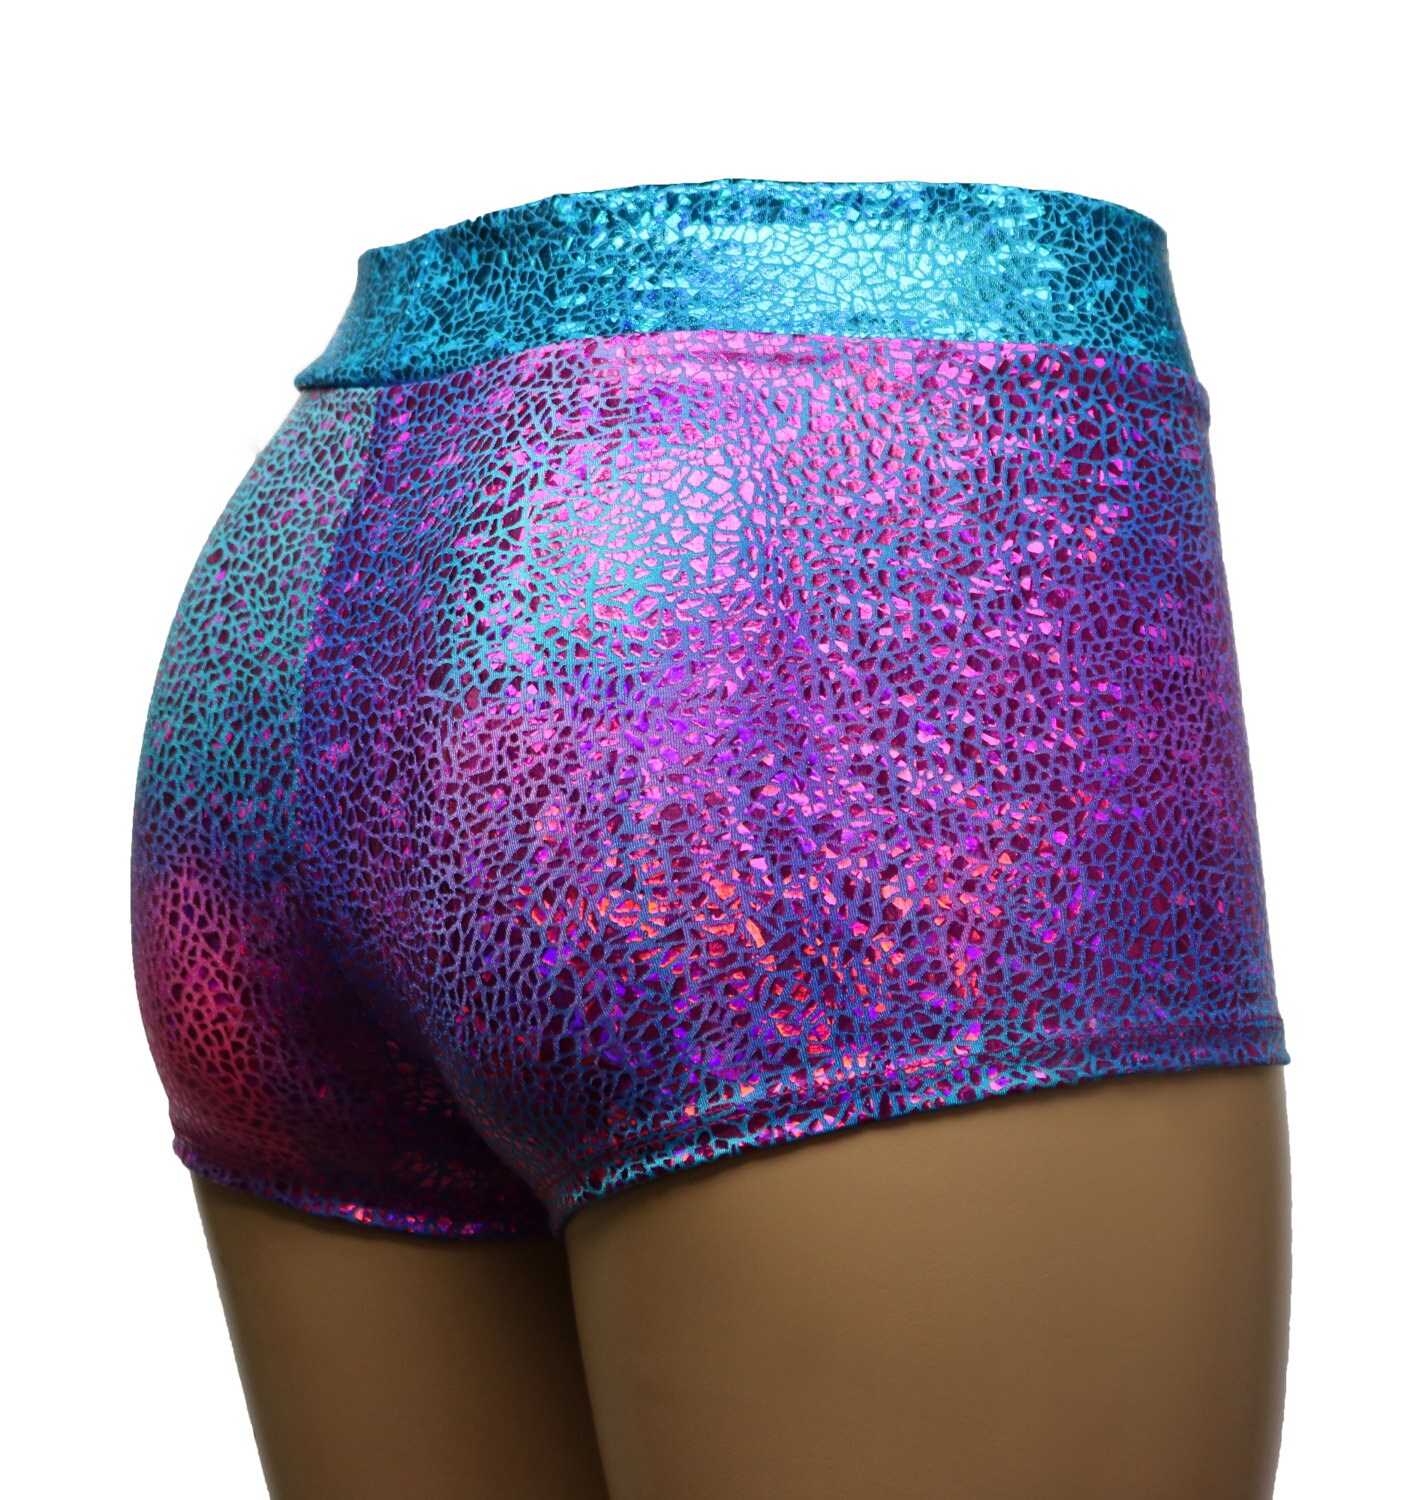 HIGH WAIST Shiny Spandex Holographic Tie Dye Mosaic Foil Booty | Etsy